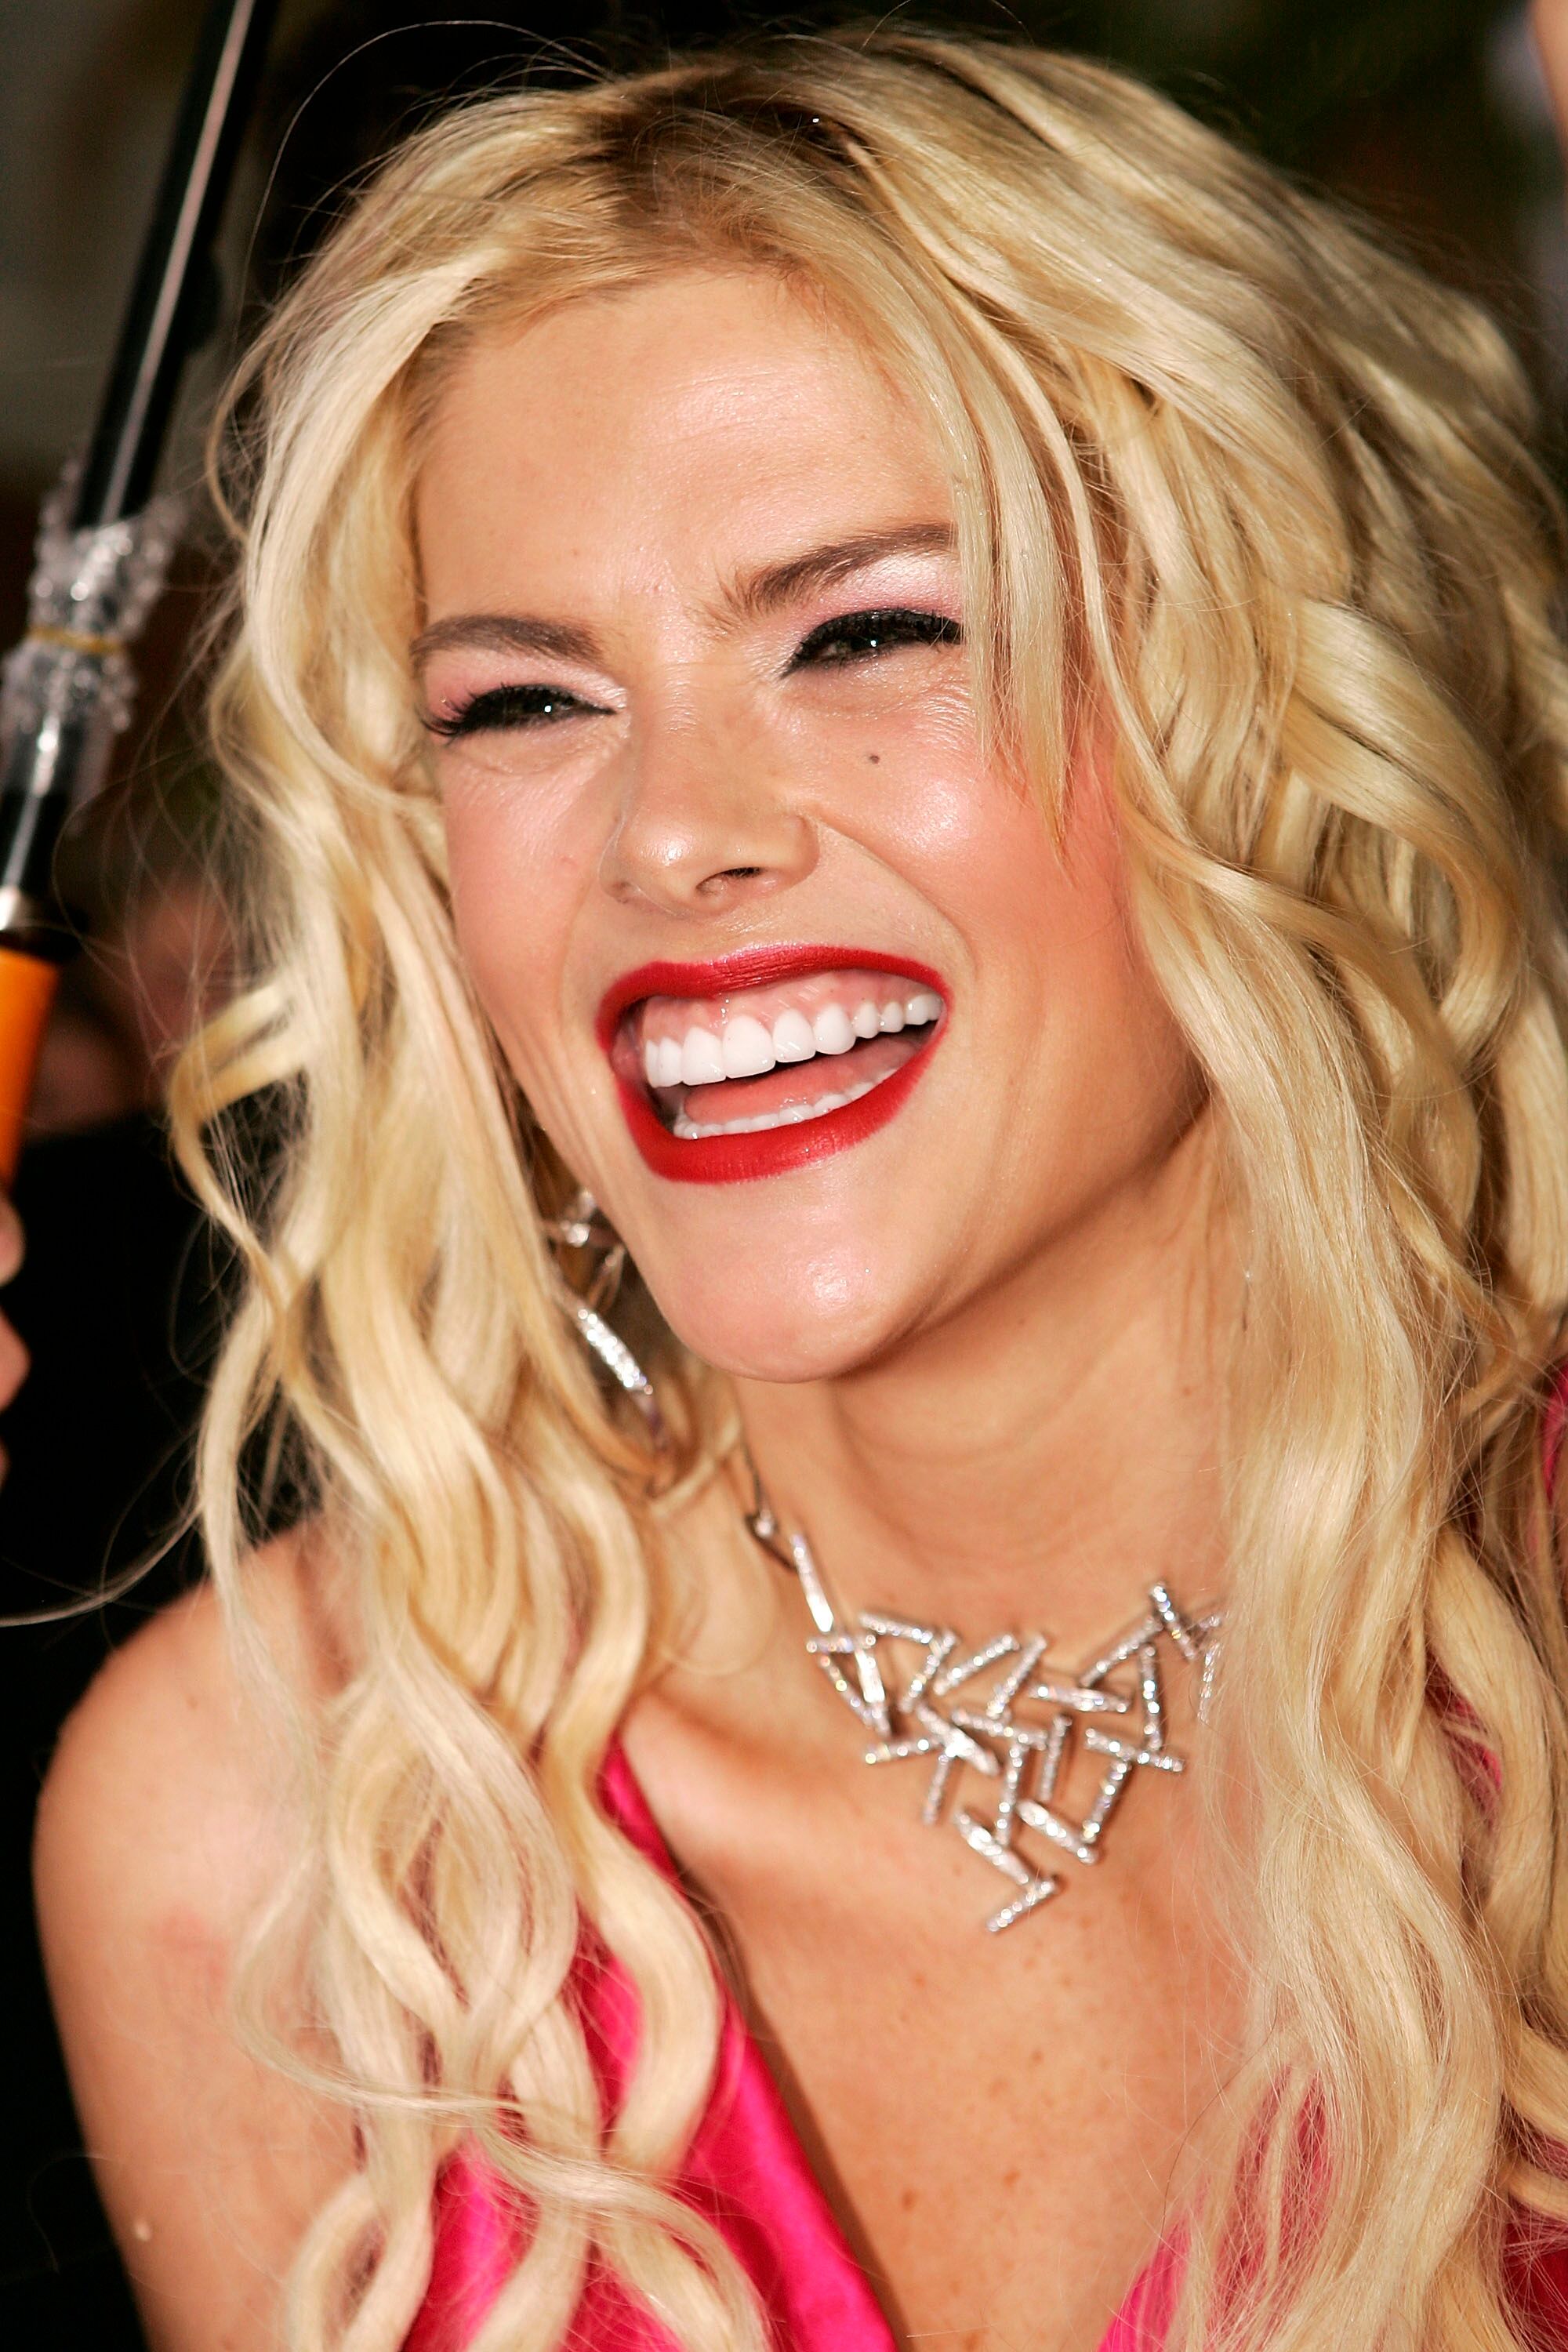 Anna Nicole Smith's Turbulent Life before It Was Tragically Cut Short at 39